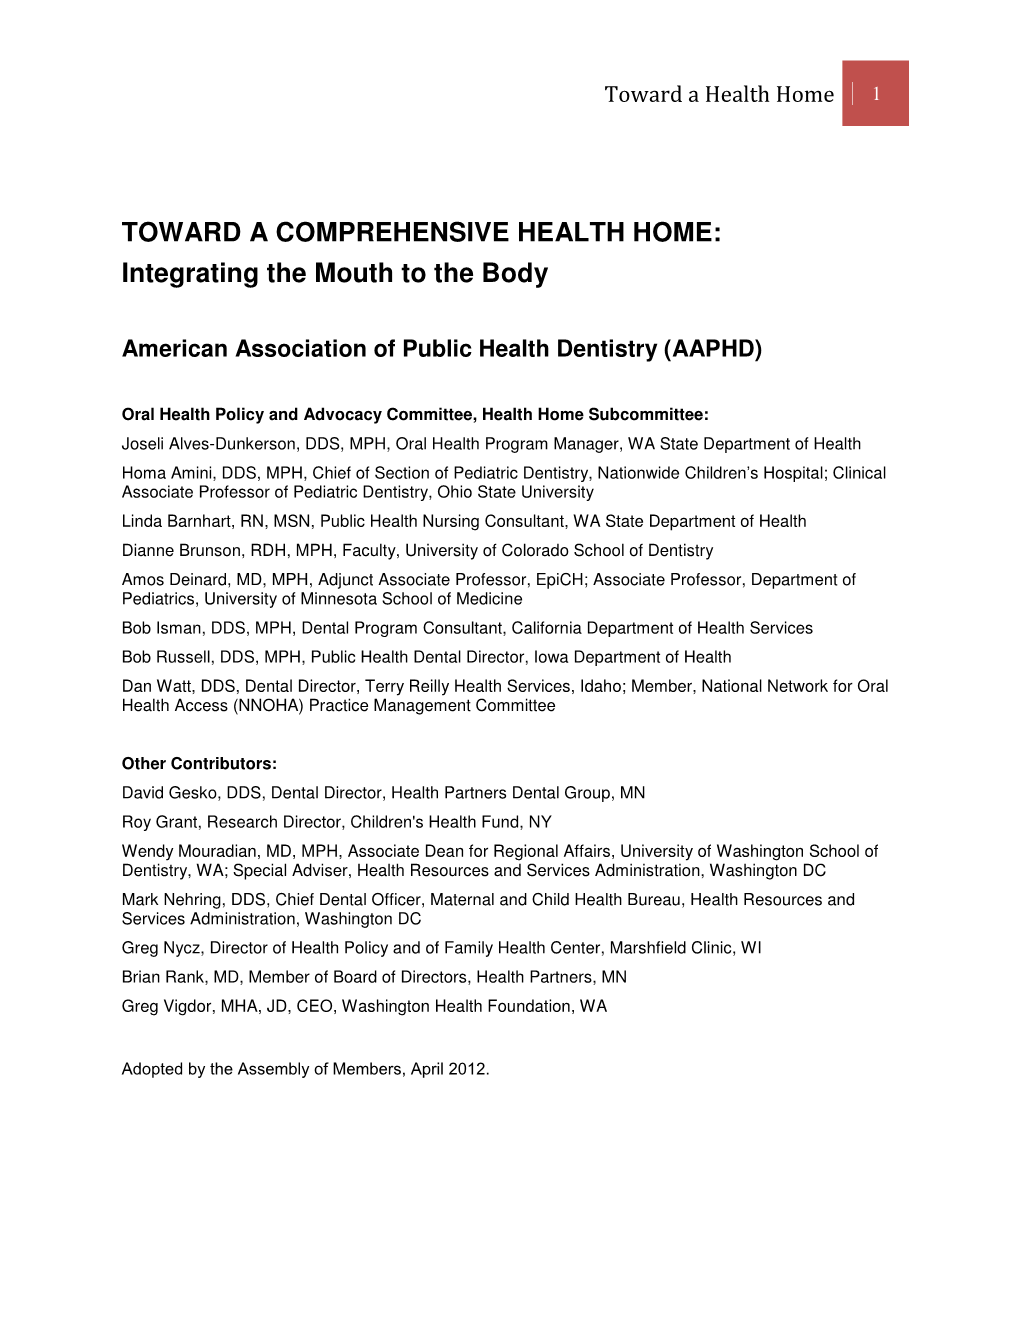 TOWARD a COMPREHENSIVE HEALTH HOME: Integrating the Mouth to the Body